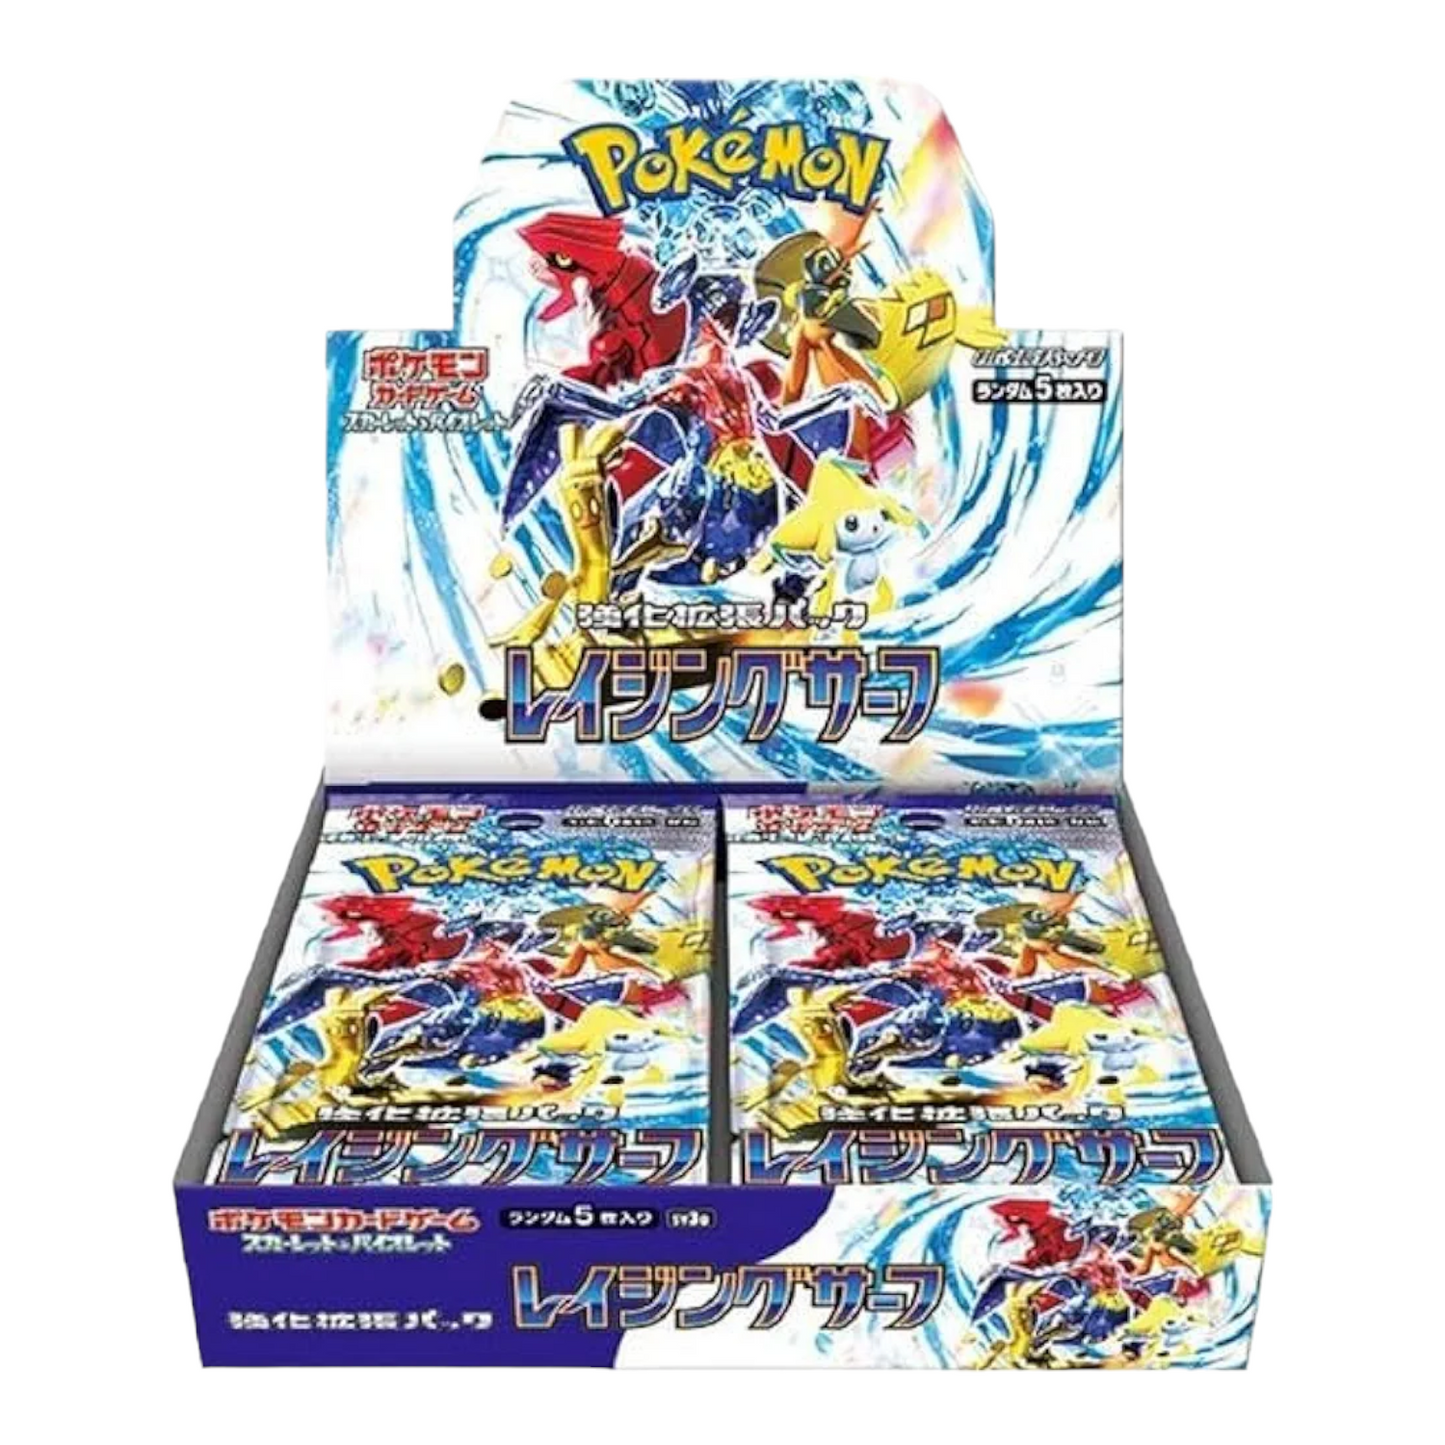 Raging surf Booster BOX【sv3a】Japanese Factory Sealed